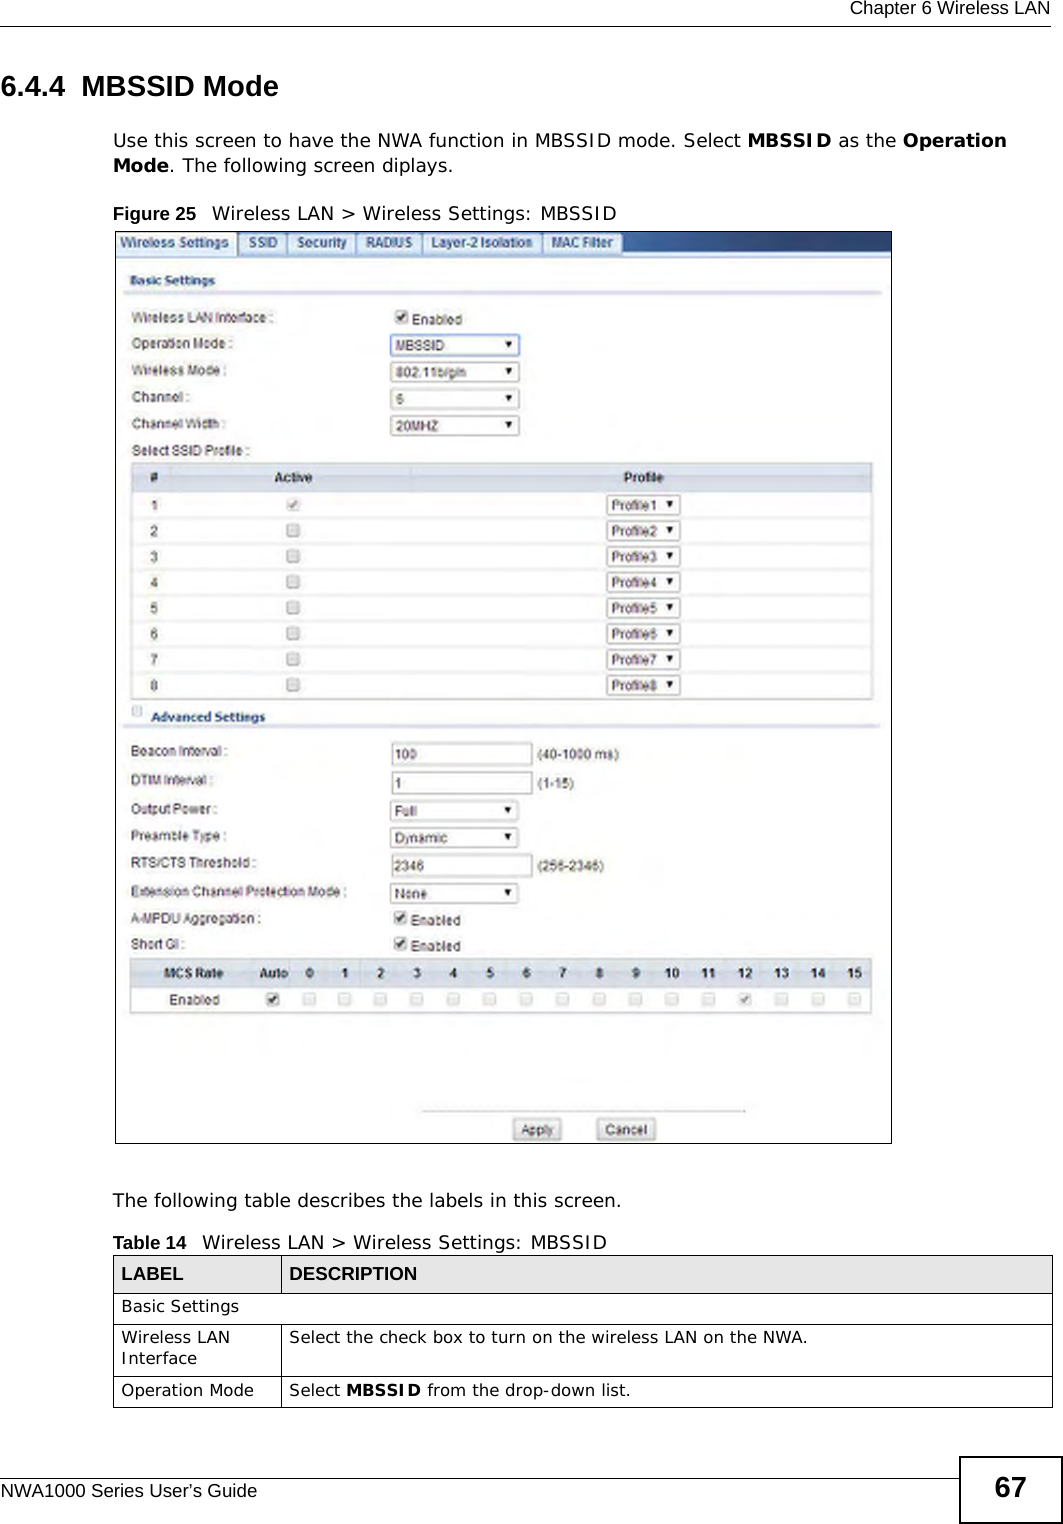  Chapter 6 Wireless LANNWA1000 Series User’s Guide 676.4.4  MBSSID ModeUse this screen to have the NWA function in MBSSID mode. Select MBSSID as the Operation Mode. The following screen diplays.Figure 25   Wireless LAN &gt; Wireless Settings: MBSSIDThe following table describes the labels in this screen. Table 14   Wireless LAN &gt; Wireless Settings: MBSSIDLABEL DESCRIPTIONBasic SettingsWireless LAN Interface Select the check box to turn on the wireless LAN on the NWA.Operation Mode Select MBSSID from the drop-down list. 